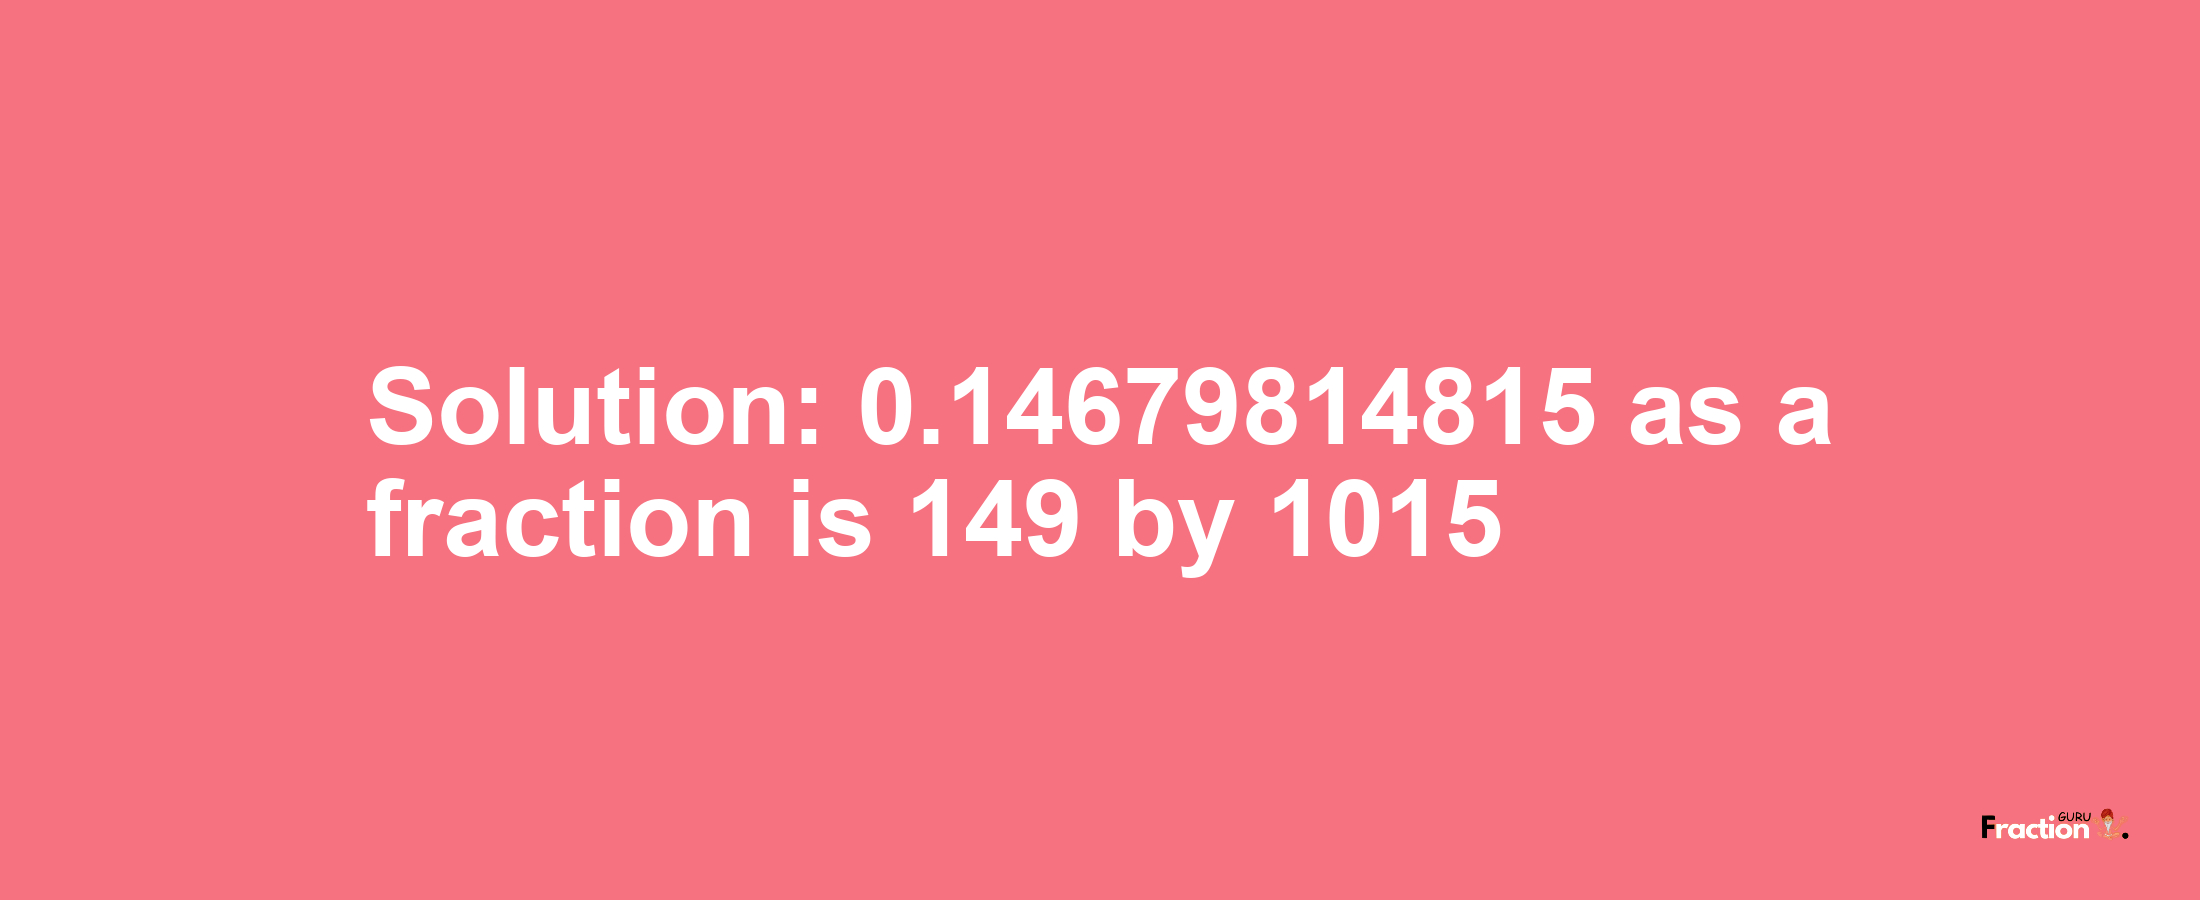 Solution:0.14679814815 as a fraction is 149/1015